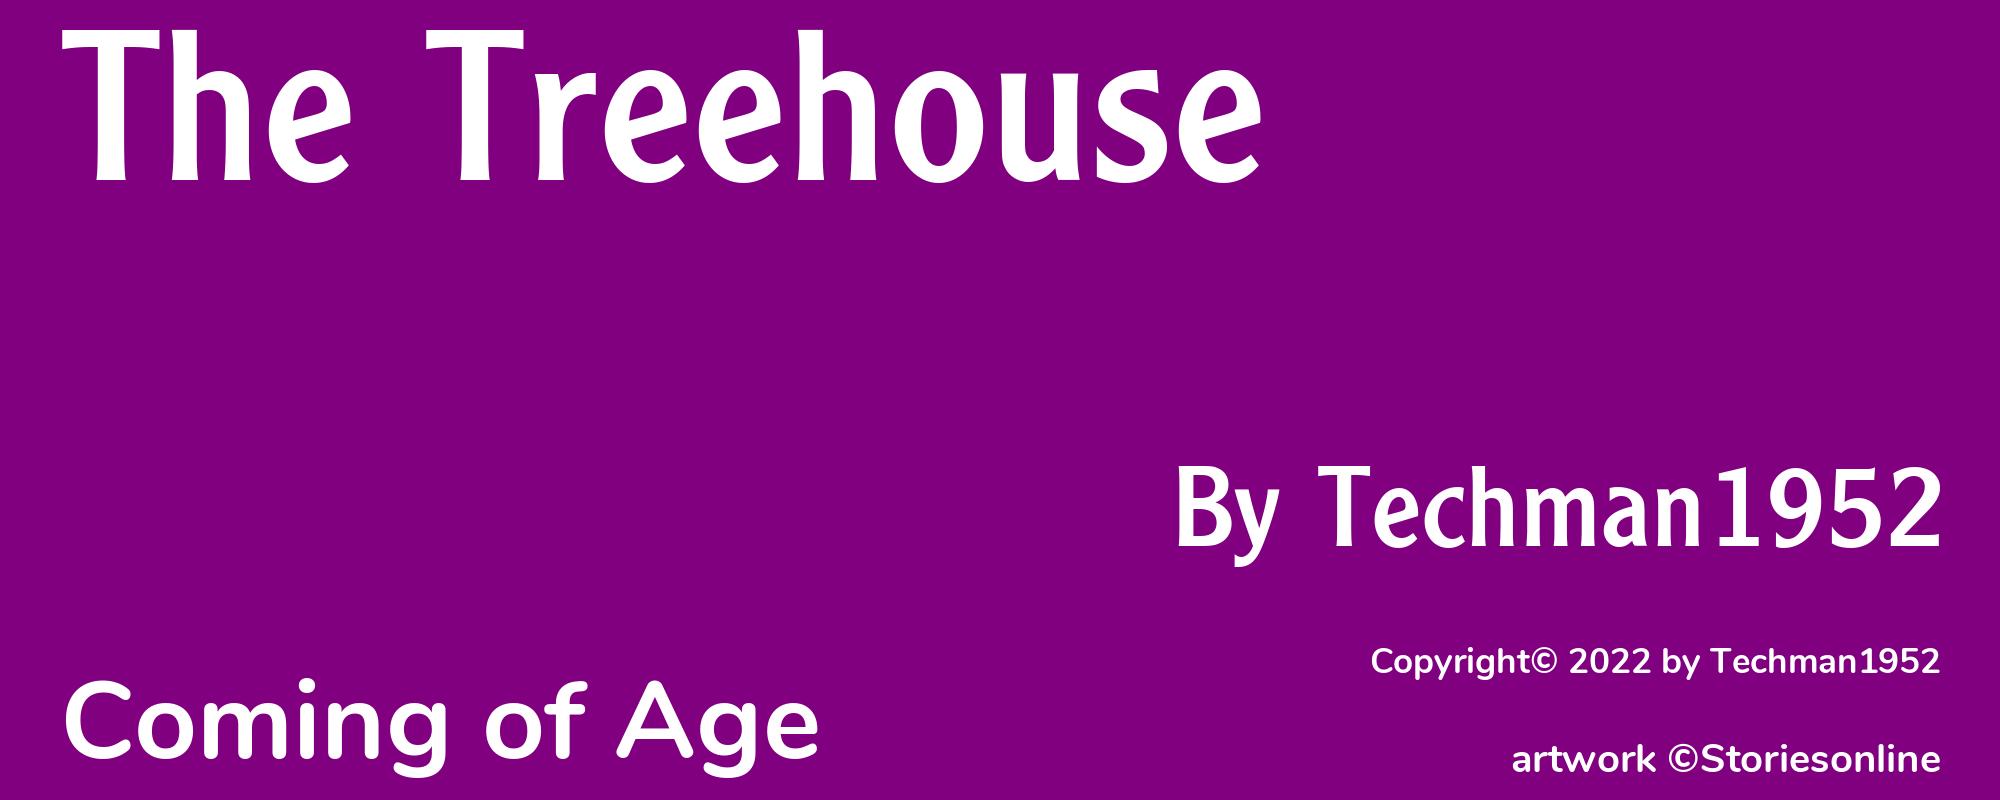 The Treehouse - Cover